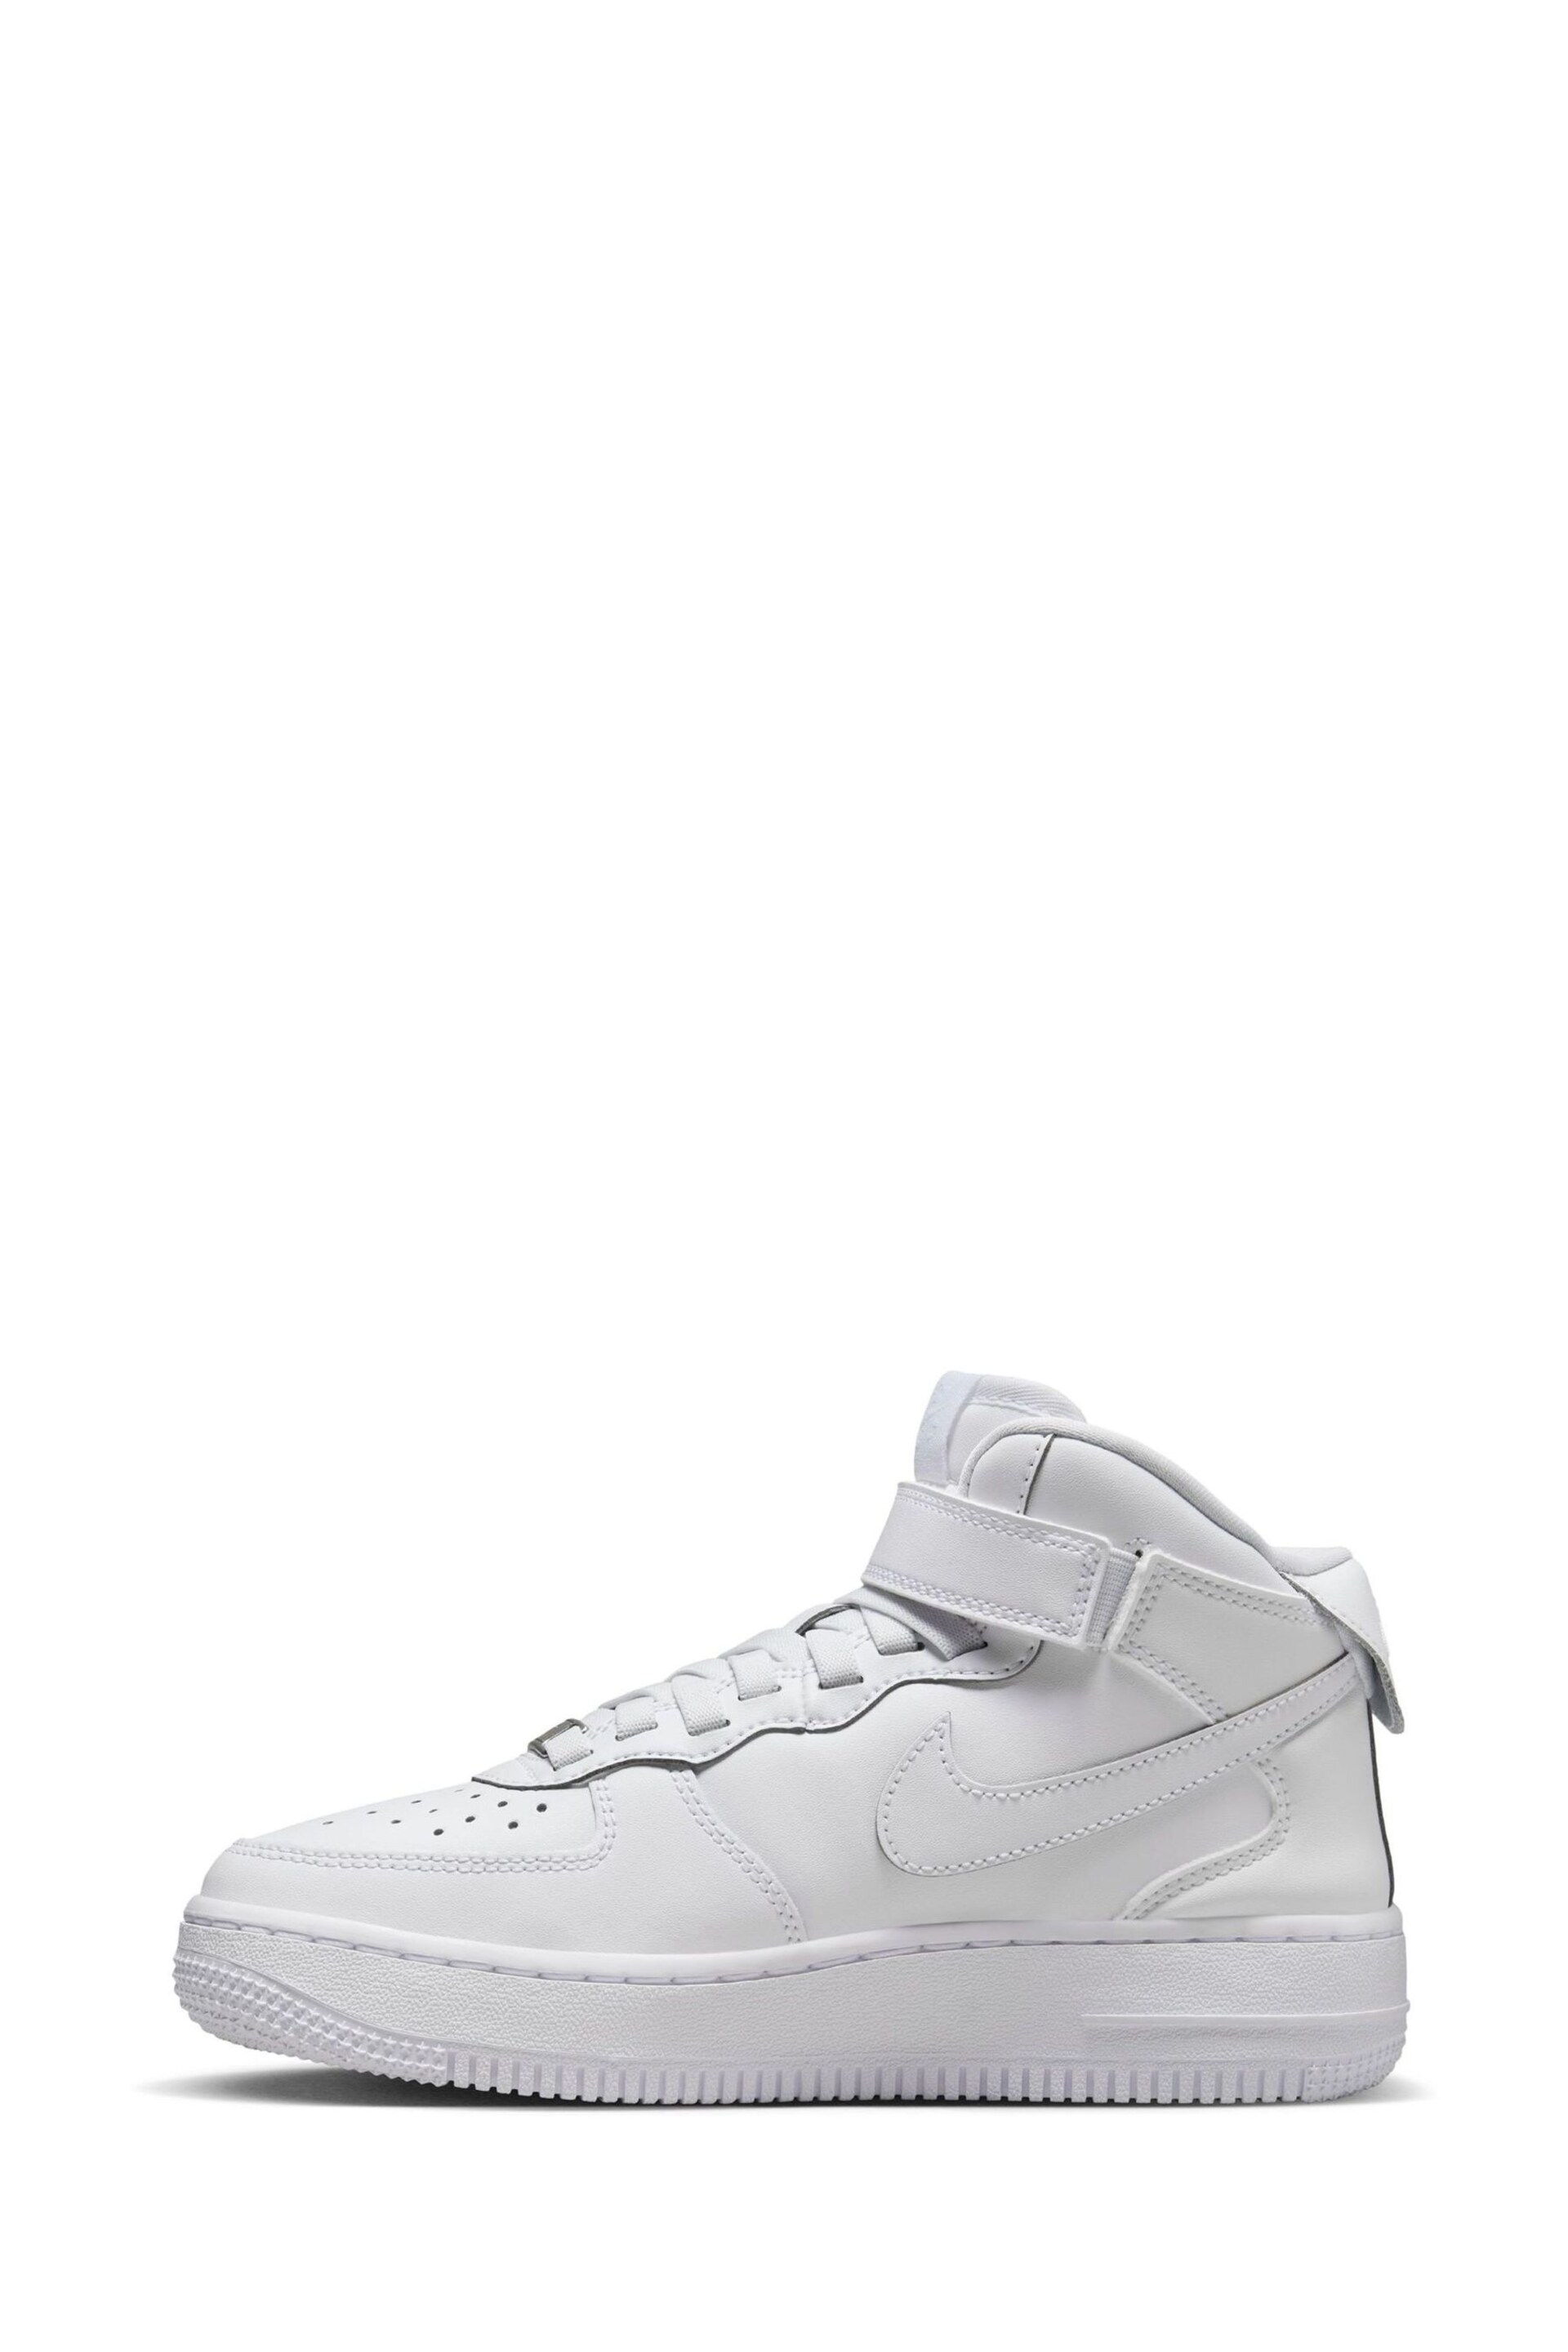 Nike White Youth Air Force 1 Mid EasyOn Trainers - Image 5 of 13